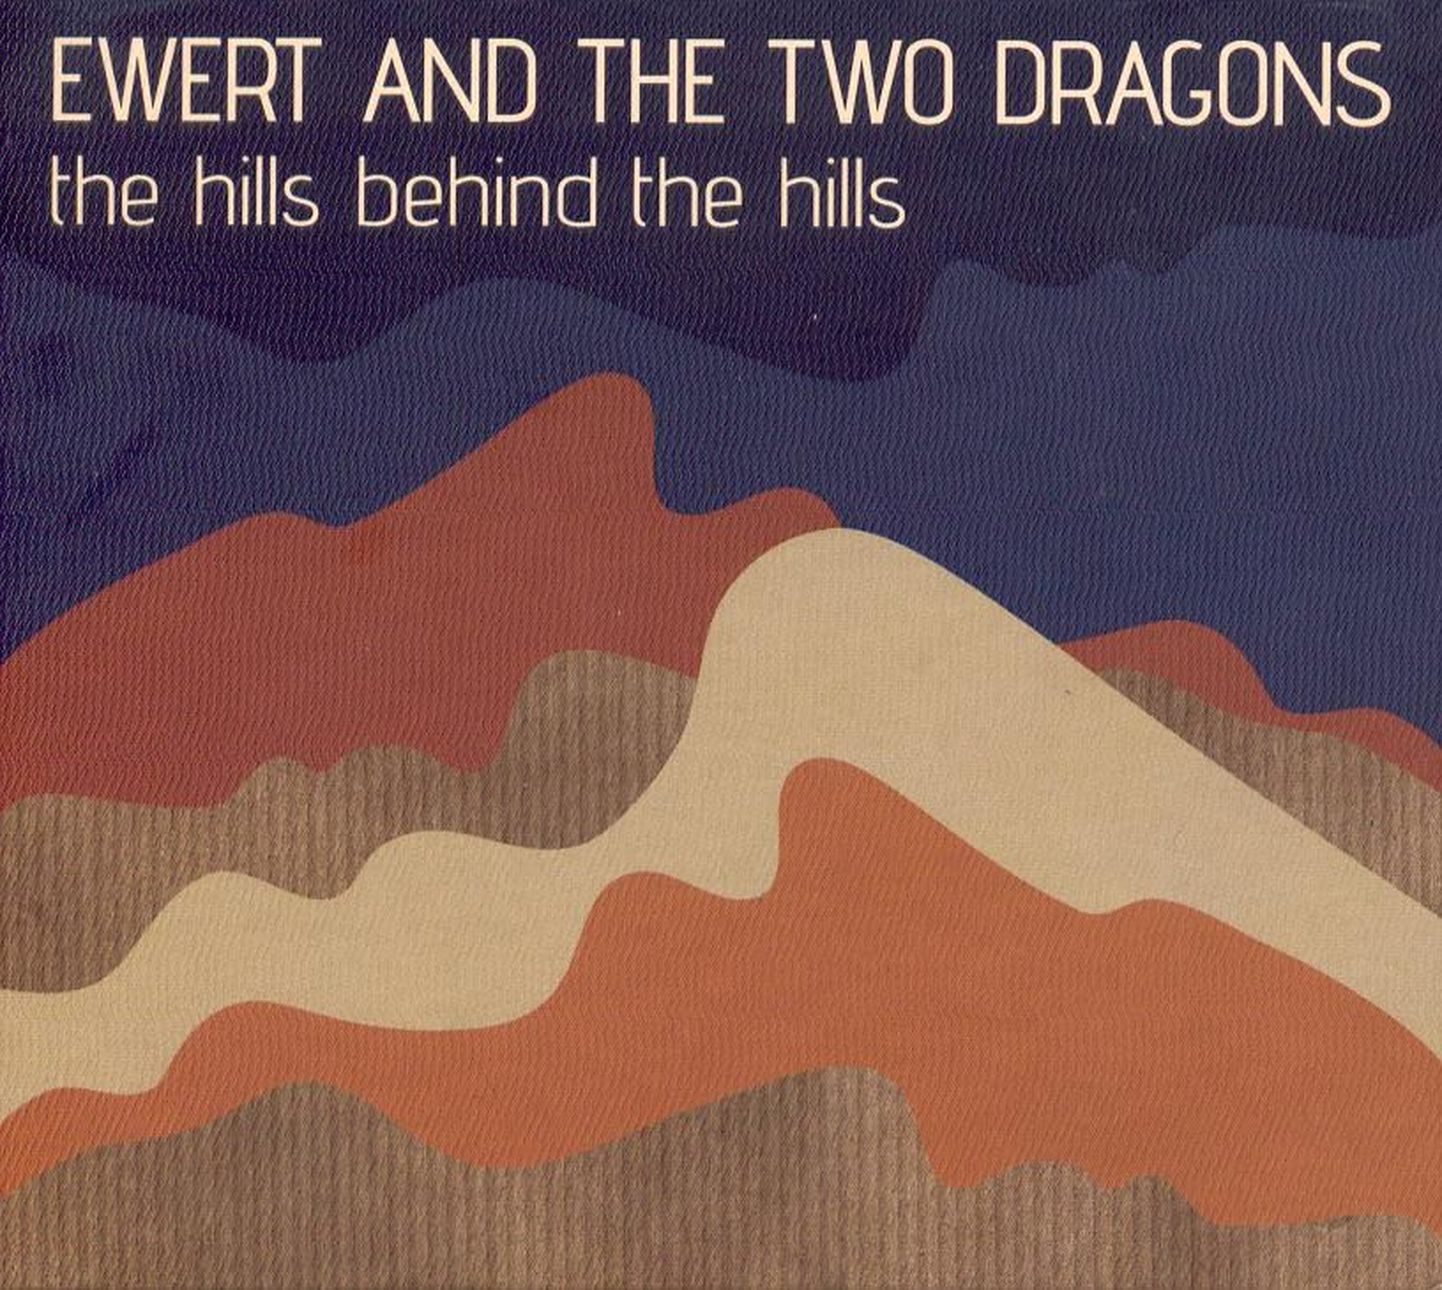 Ewert and the Two Dragons „the hills behind the hills“.